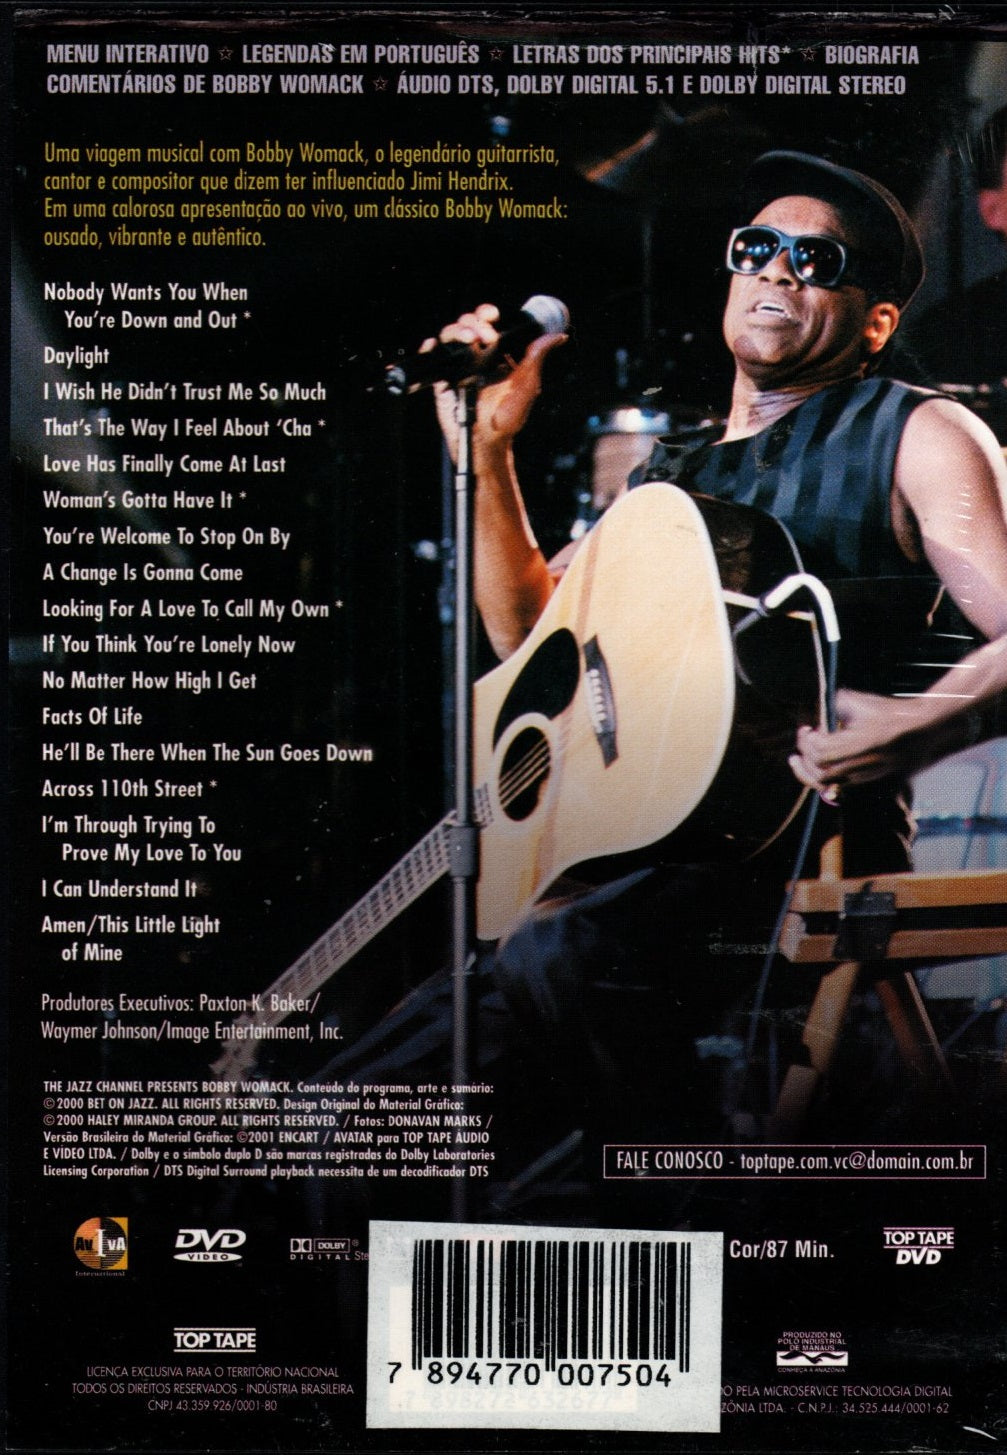 DVD Bobby Womack - The Jazz Channel